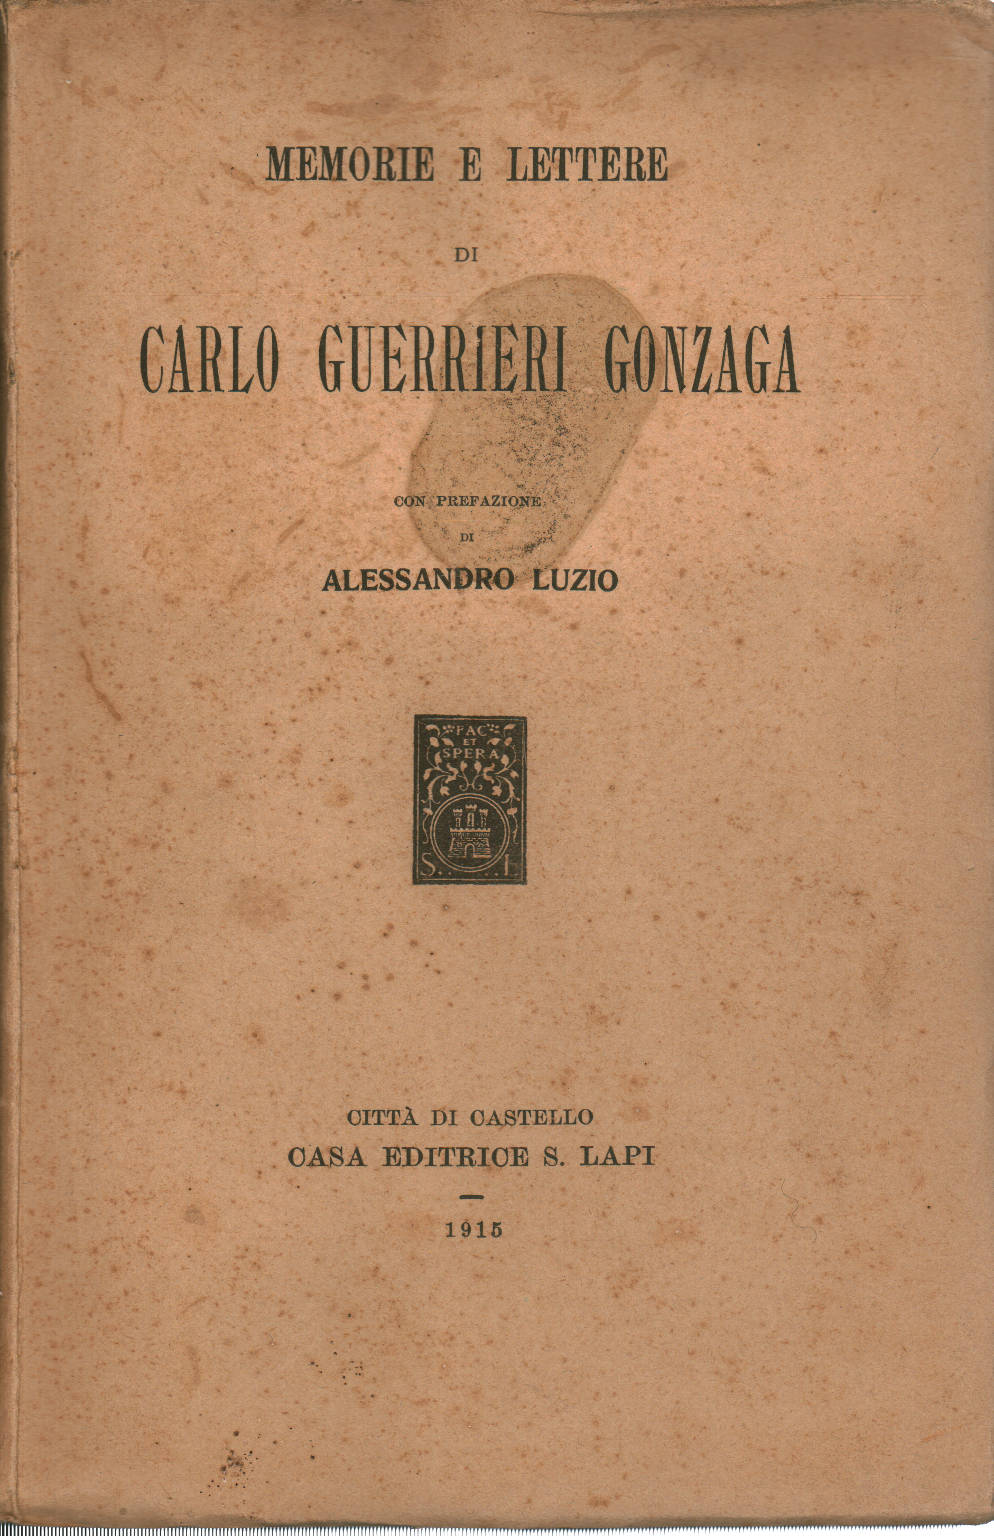 Memoirs and letters of Carlo Guerrieri Gonzaga, Carlo Guerrieri Gonzaga